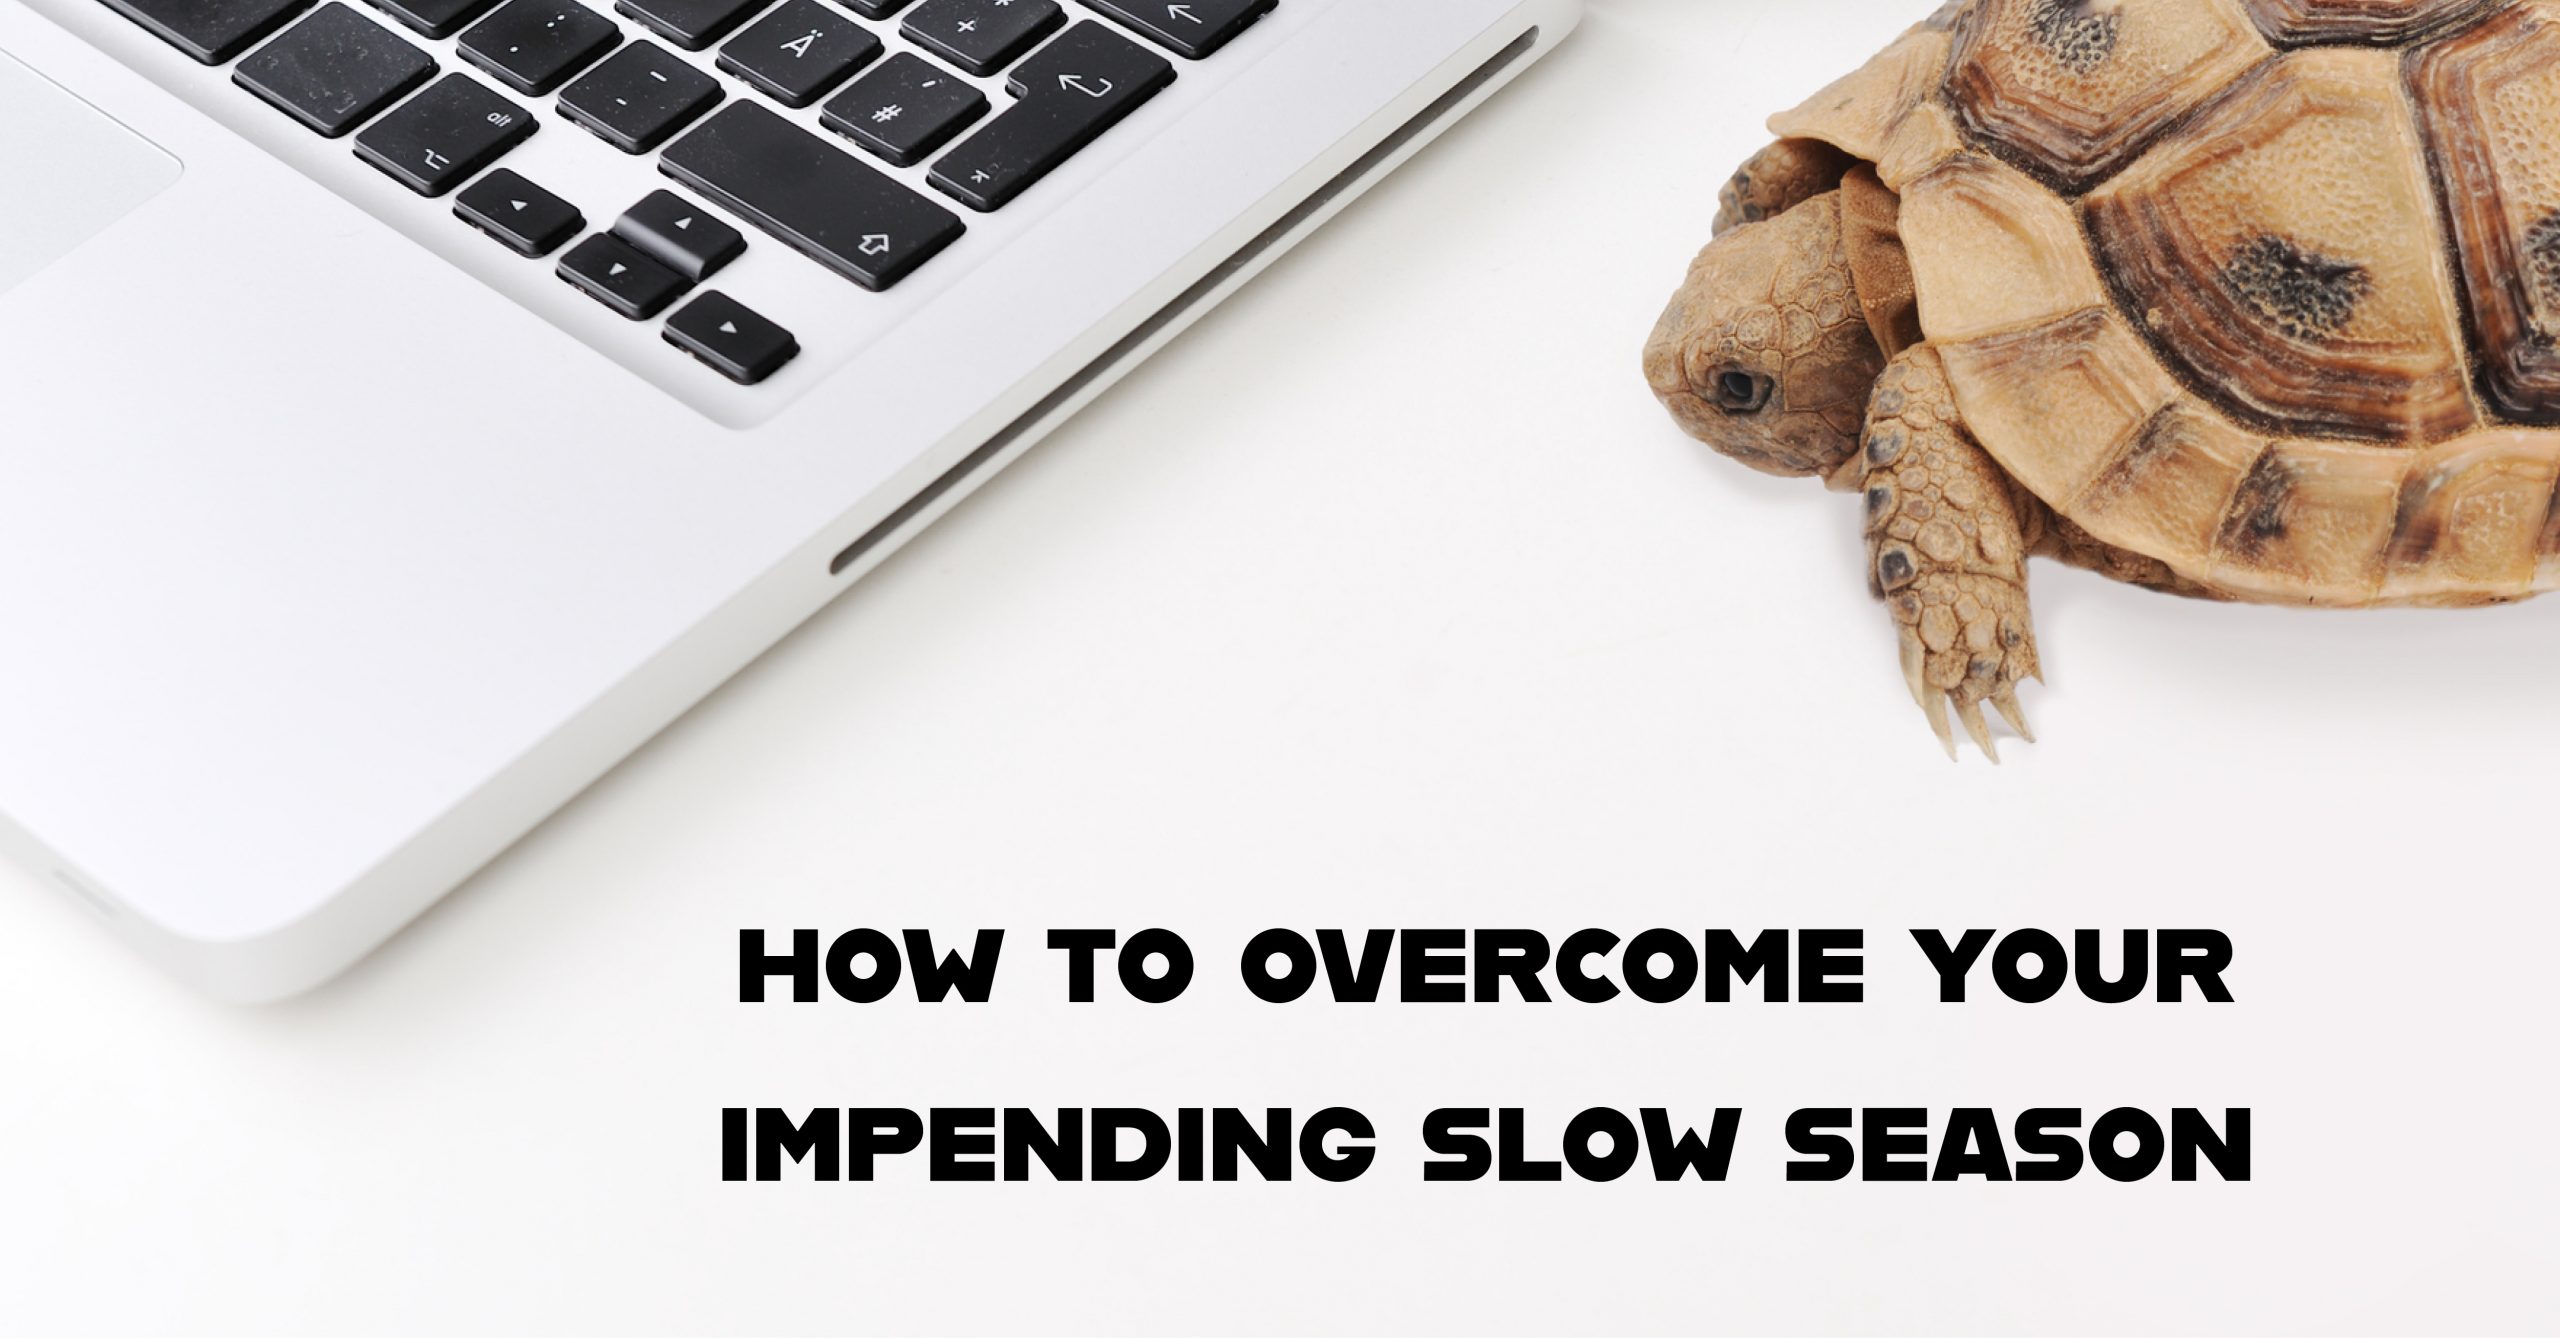 How To Overcome Your Impending Slow Season